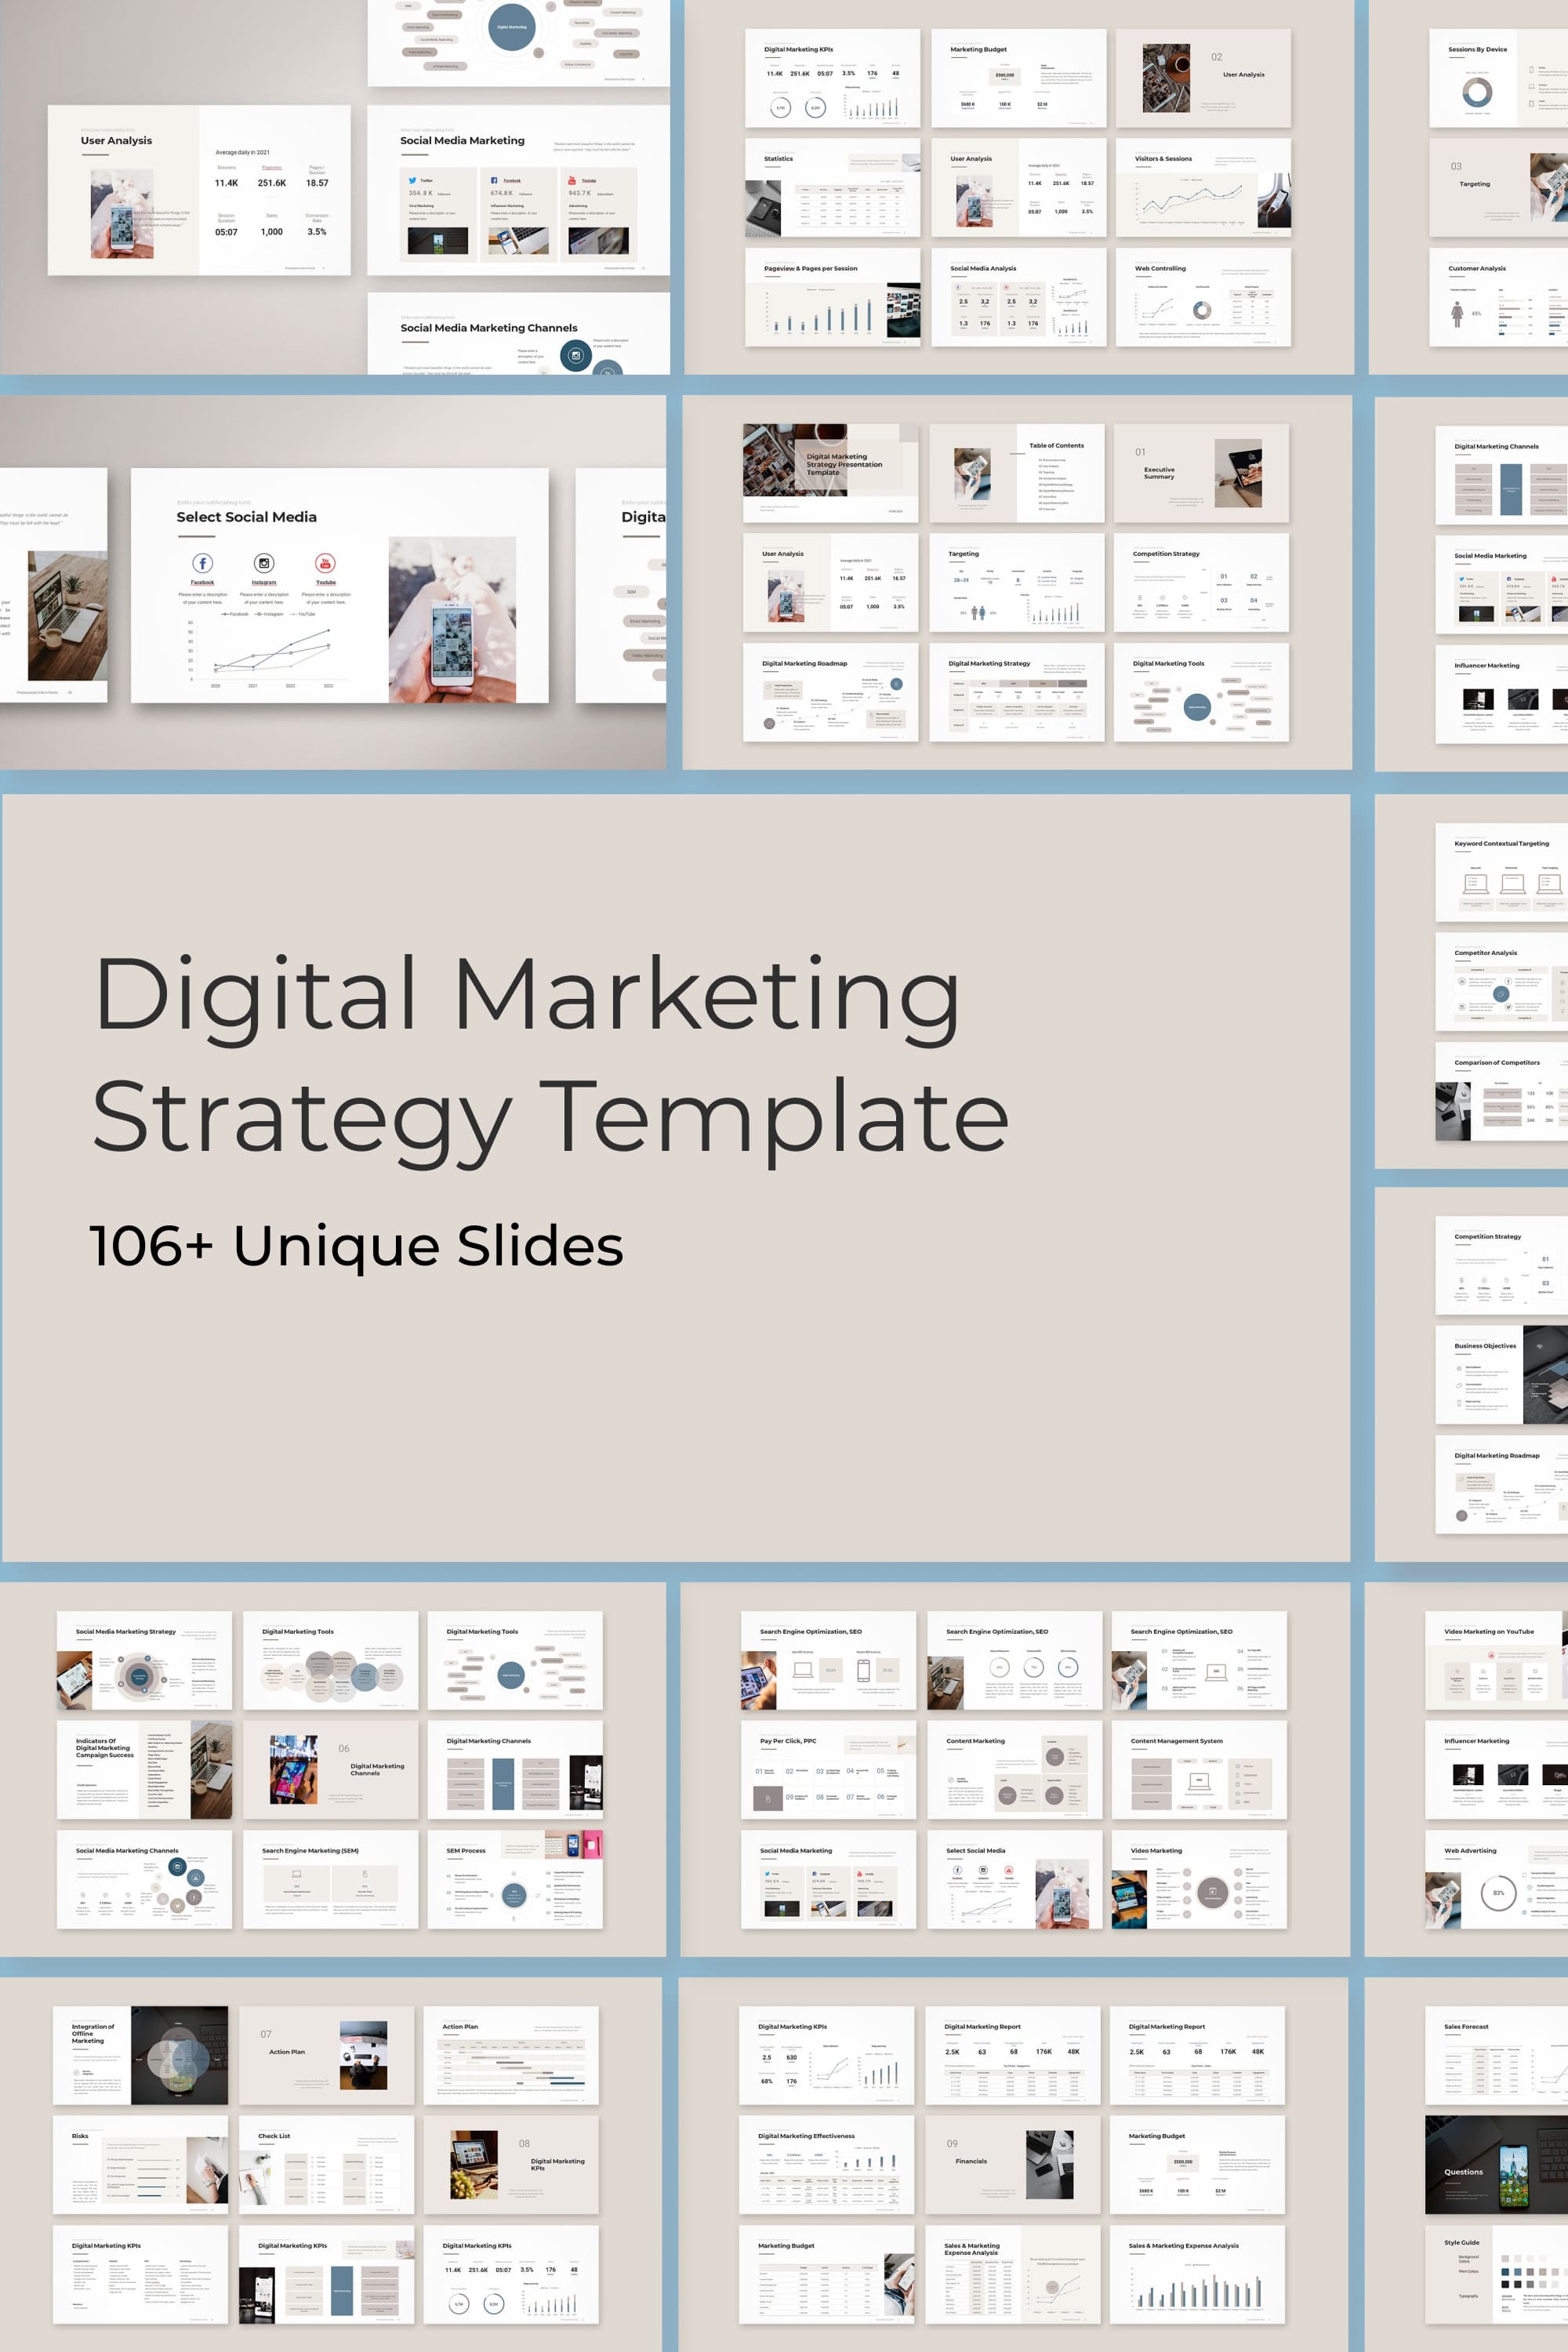 Digital Marketing Strategy Template - preview of Pinterest image.